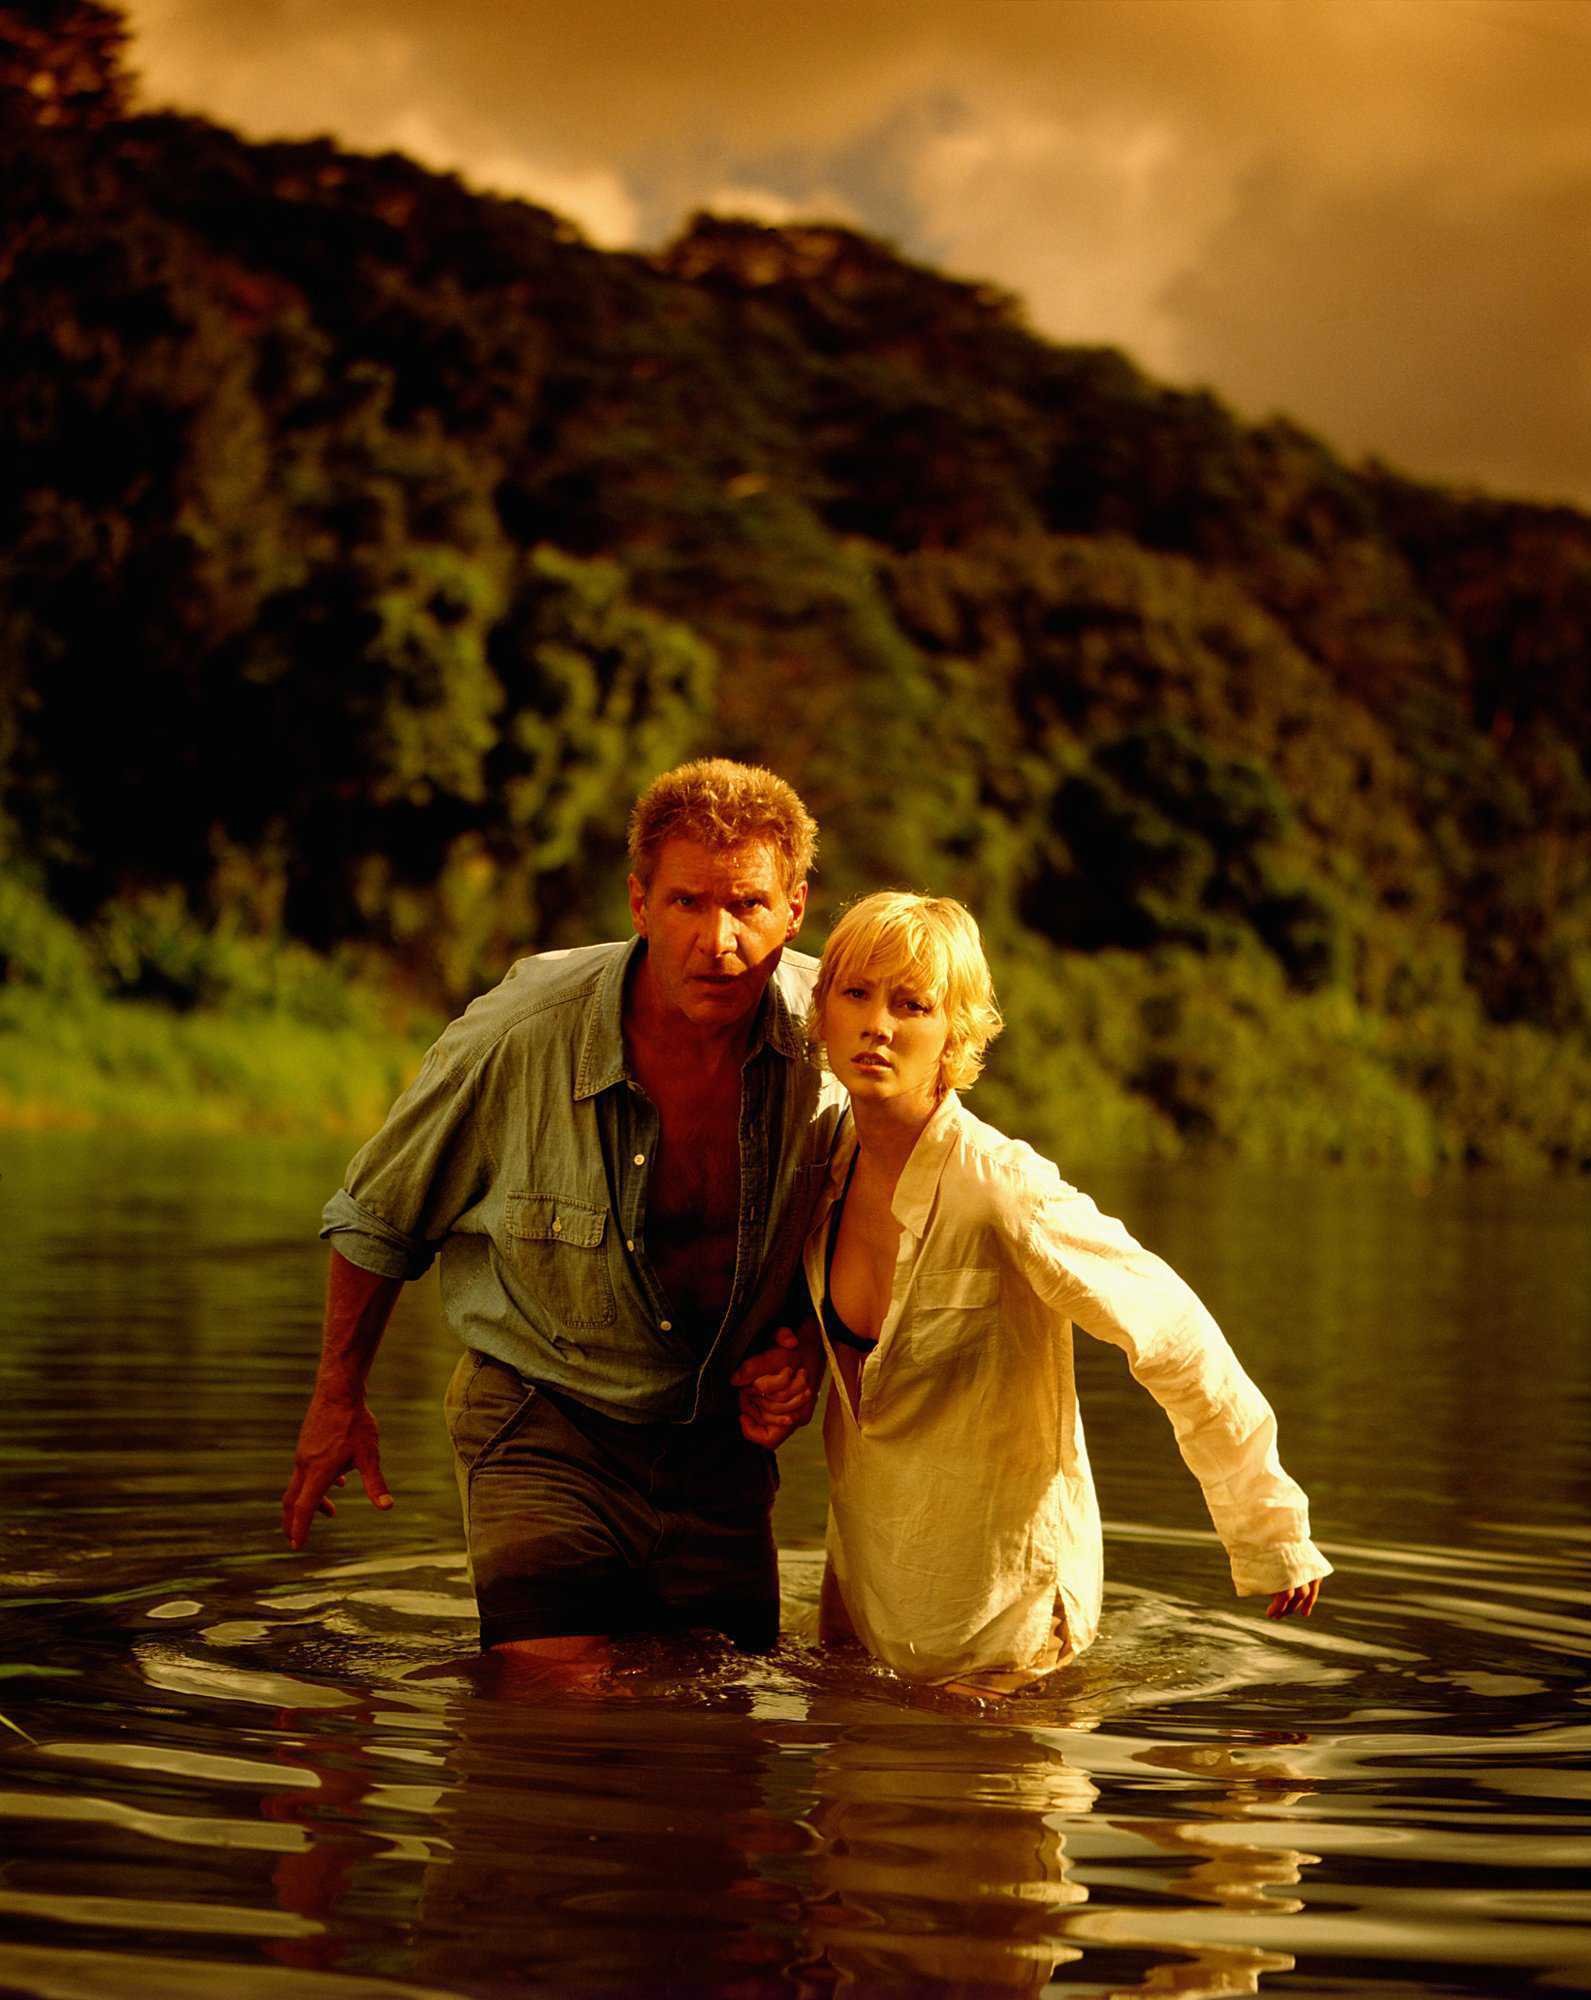 Ann and Harrison Ford c "Six days, seven nights"